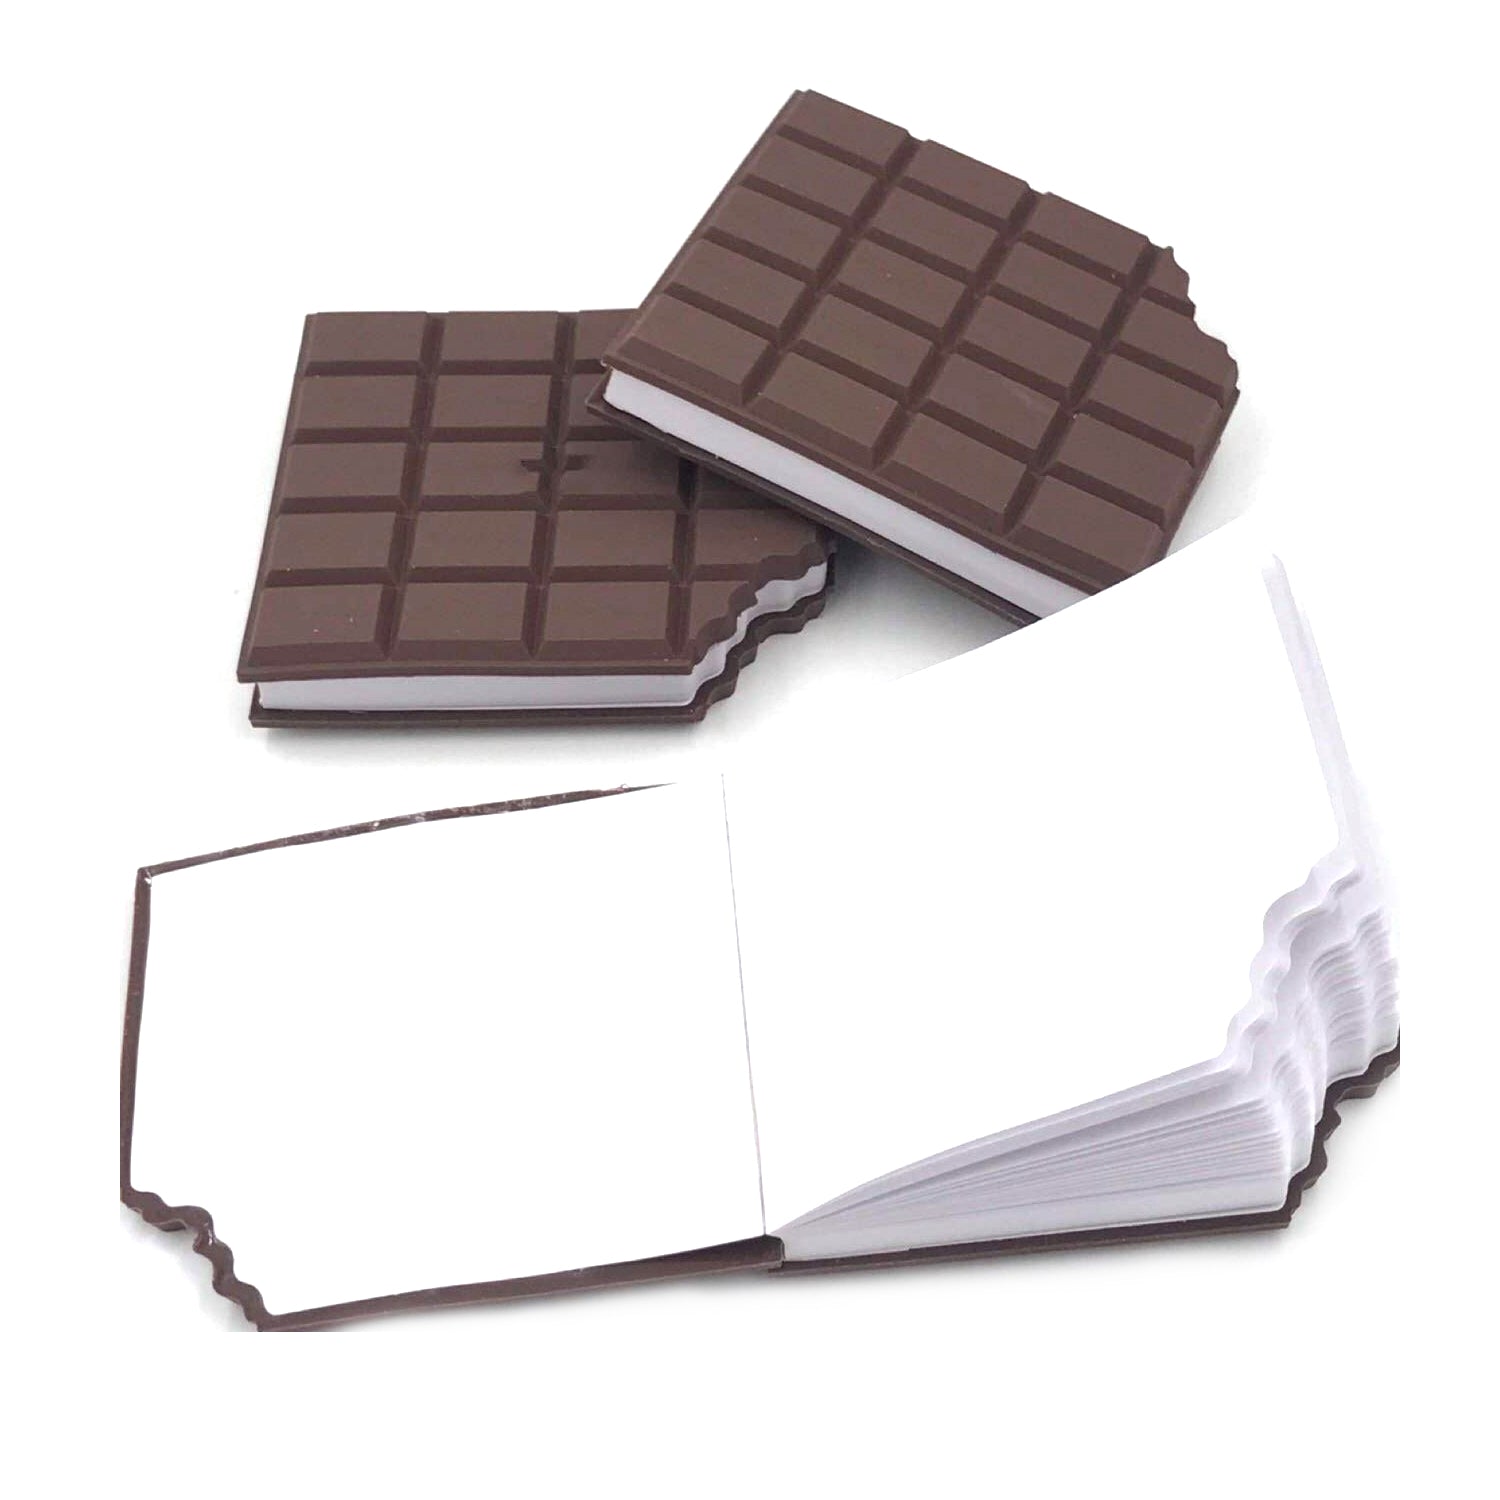 4528 Small Chocolate Scented Diary Memo Notebook in Rectangular Chocolate Bite Shape with Original Chocolate Smell Personal Pocket Diary with Plain Pages for Kids